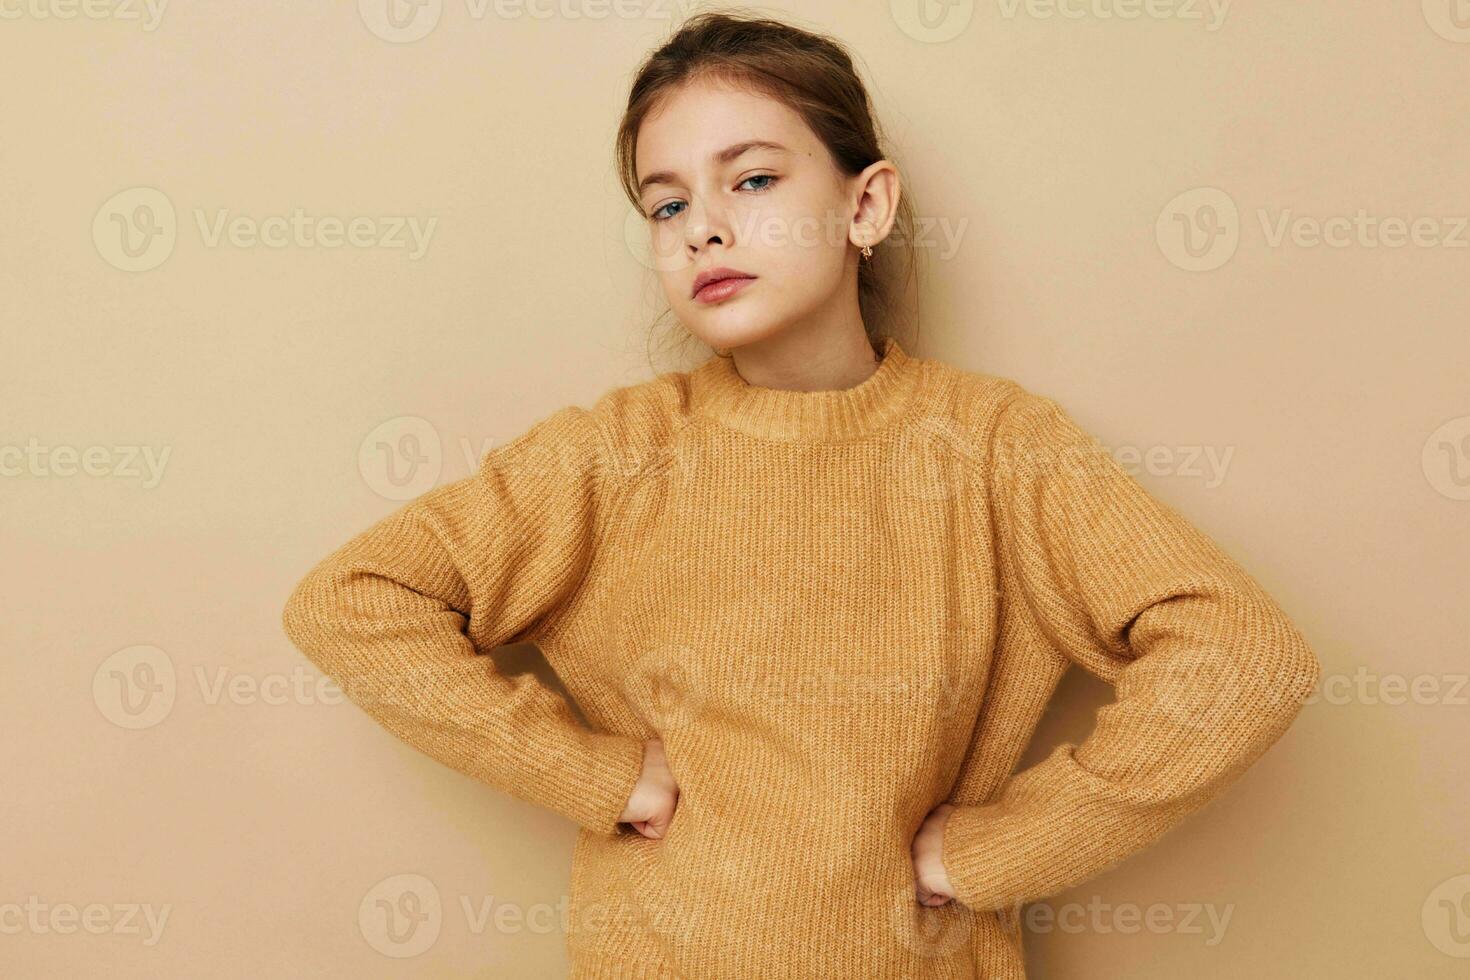 little girl in sweater posing hand gestures Lifestyle unaltered photo